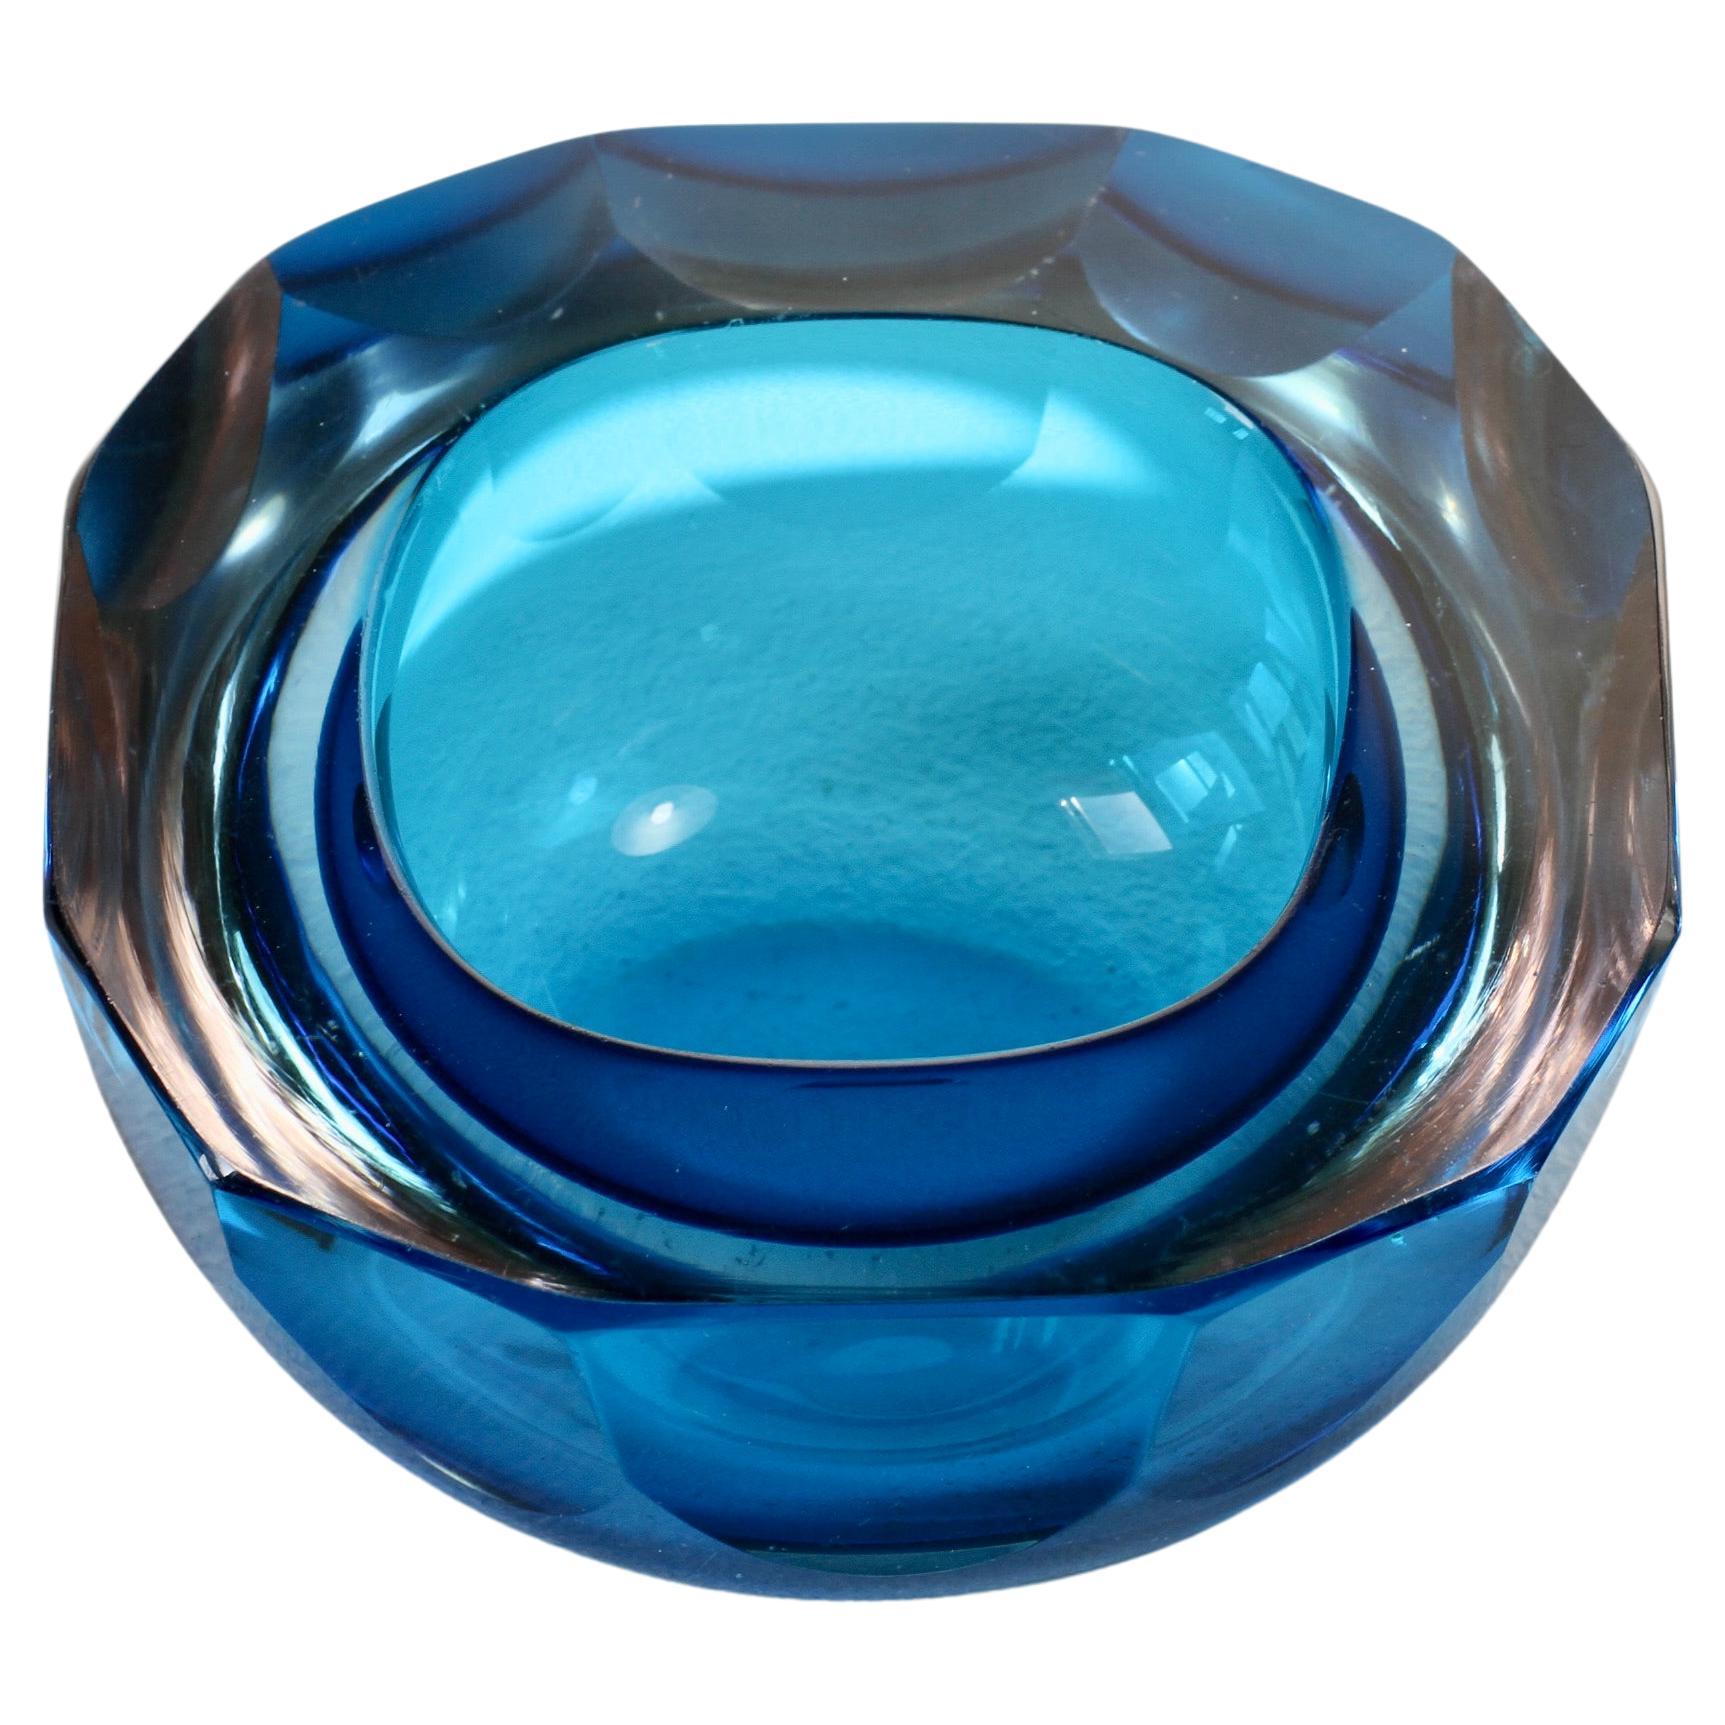 Faceted Blue Murano Midcentury Modern 1960s Sommerso Diamond Cut Glass Bowl